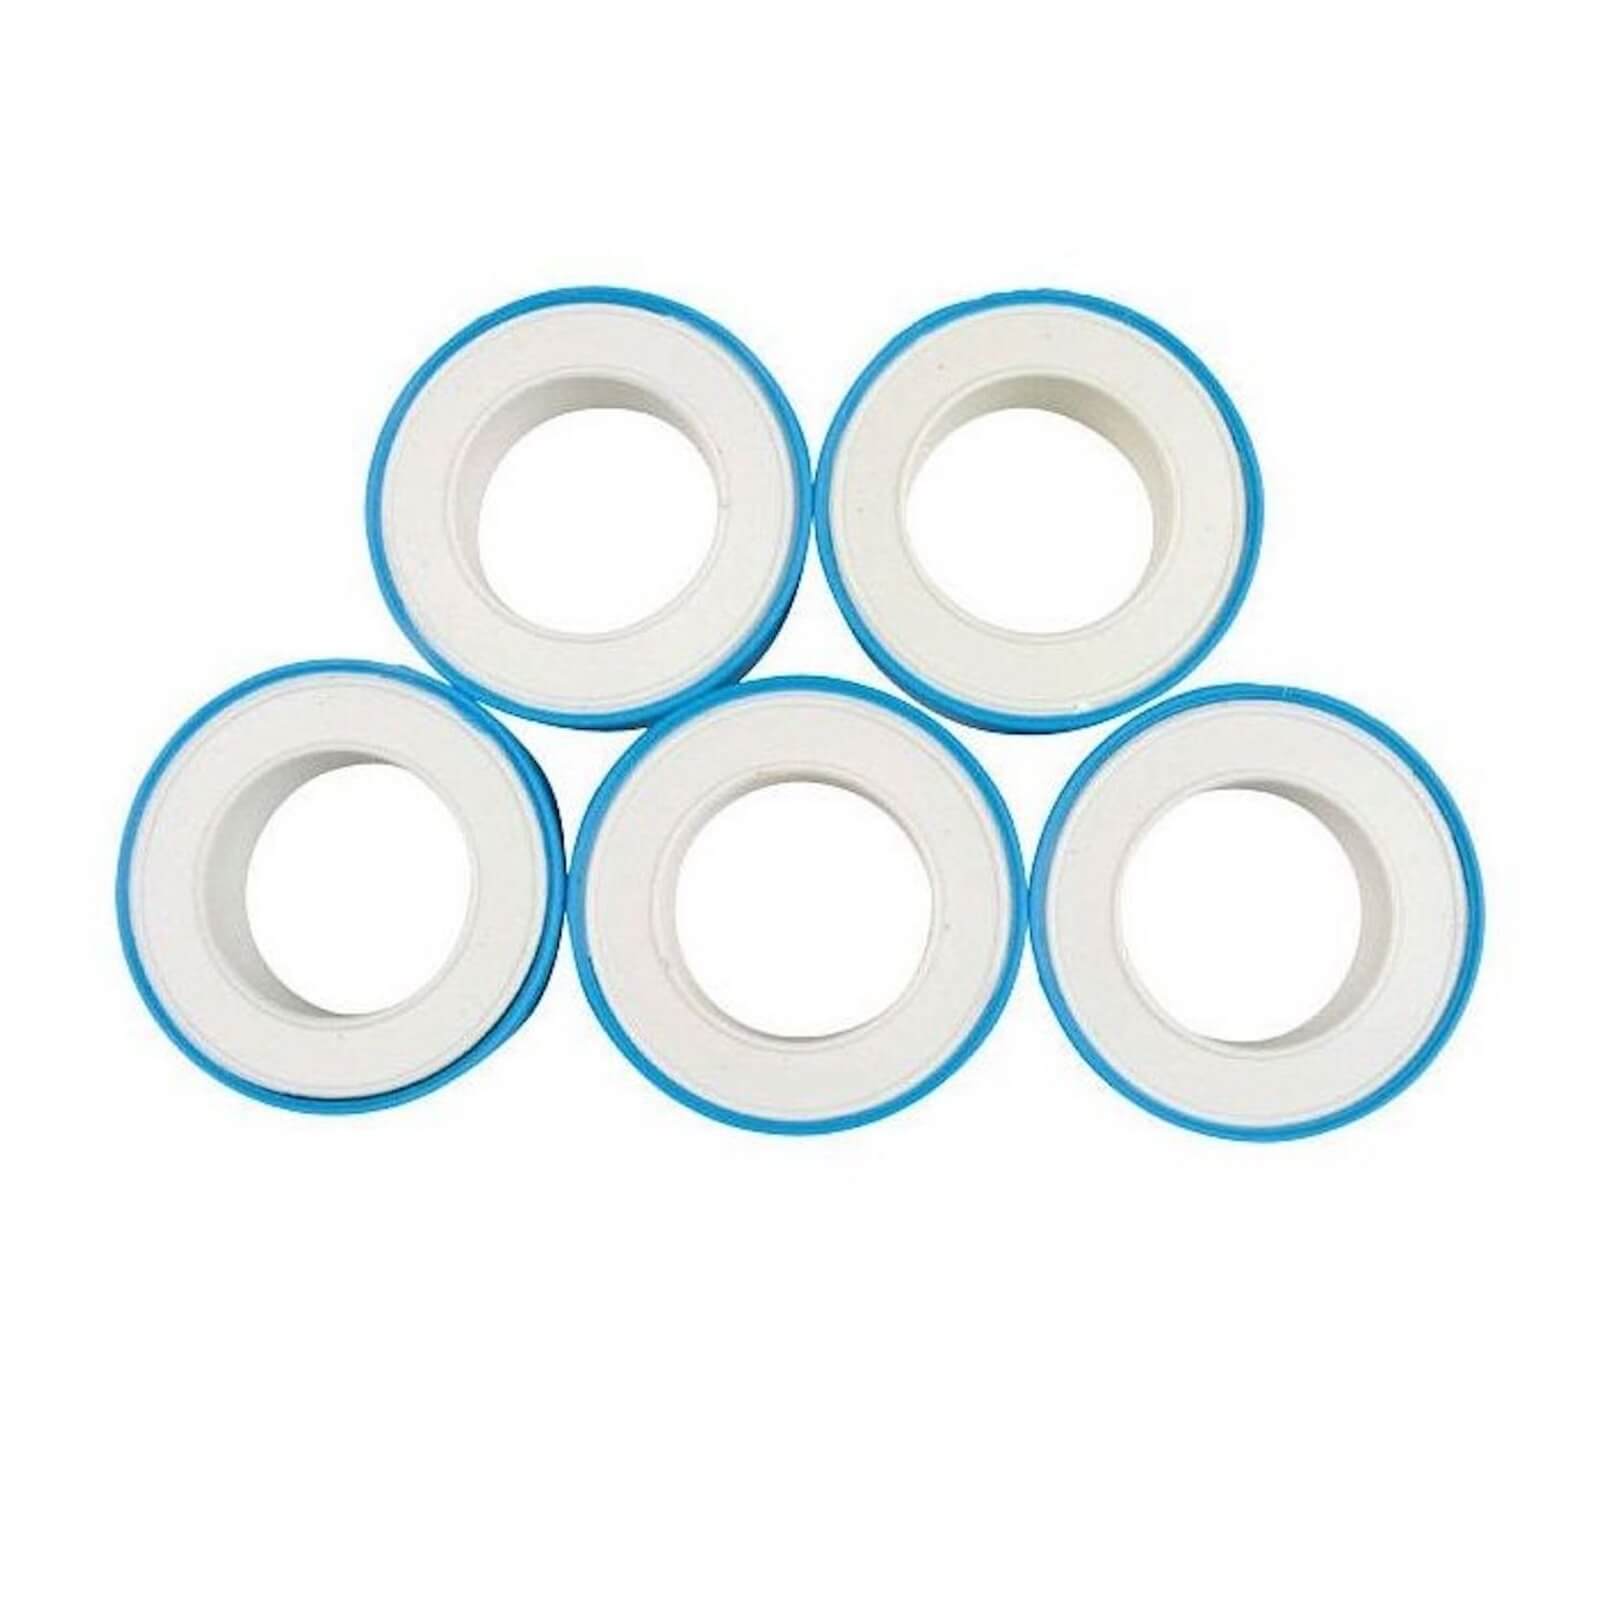 Photo of Ptfe Jointing Tape - 5 Pack